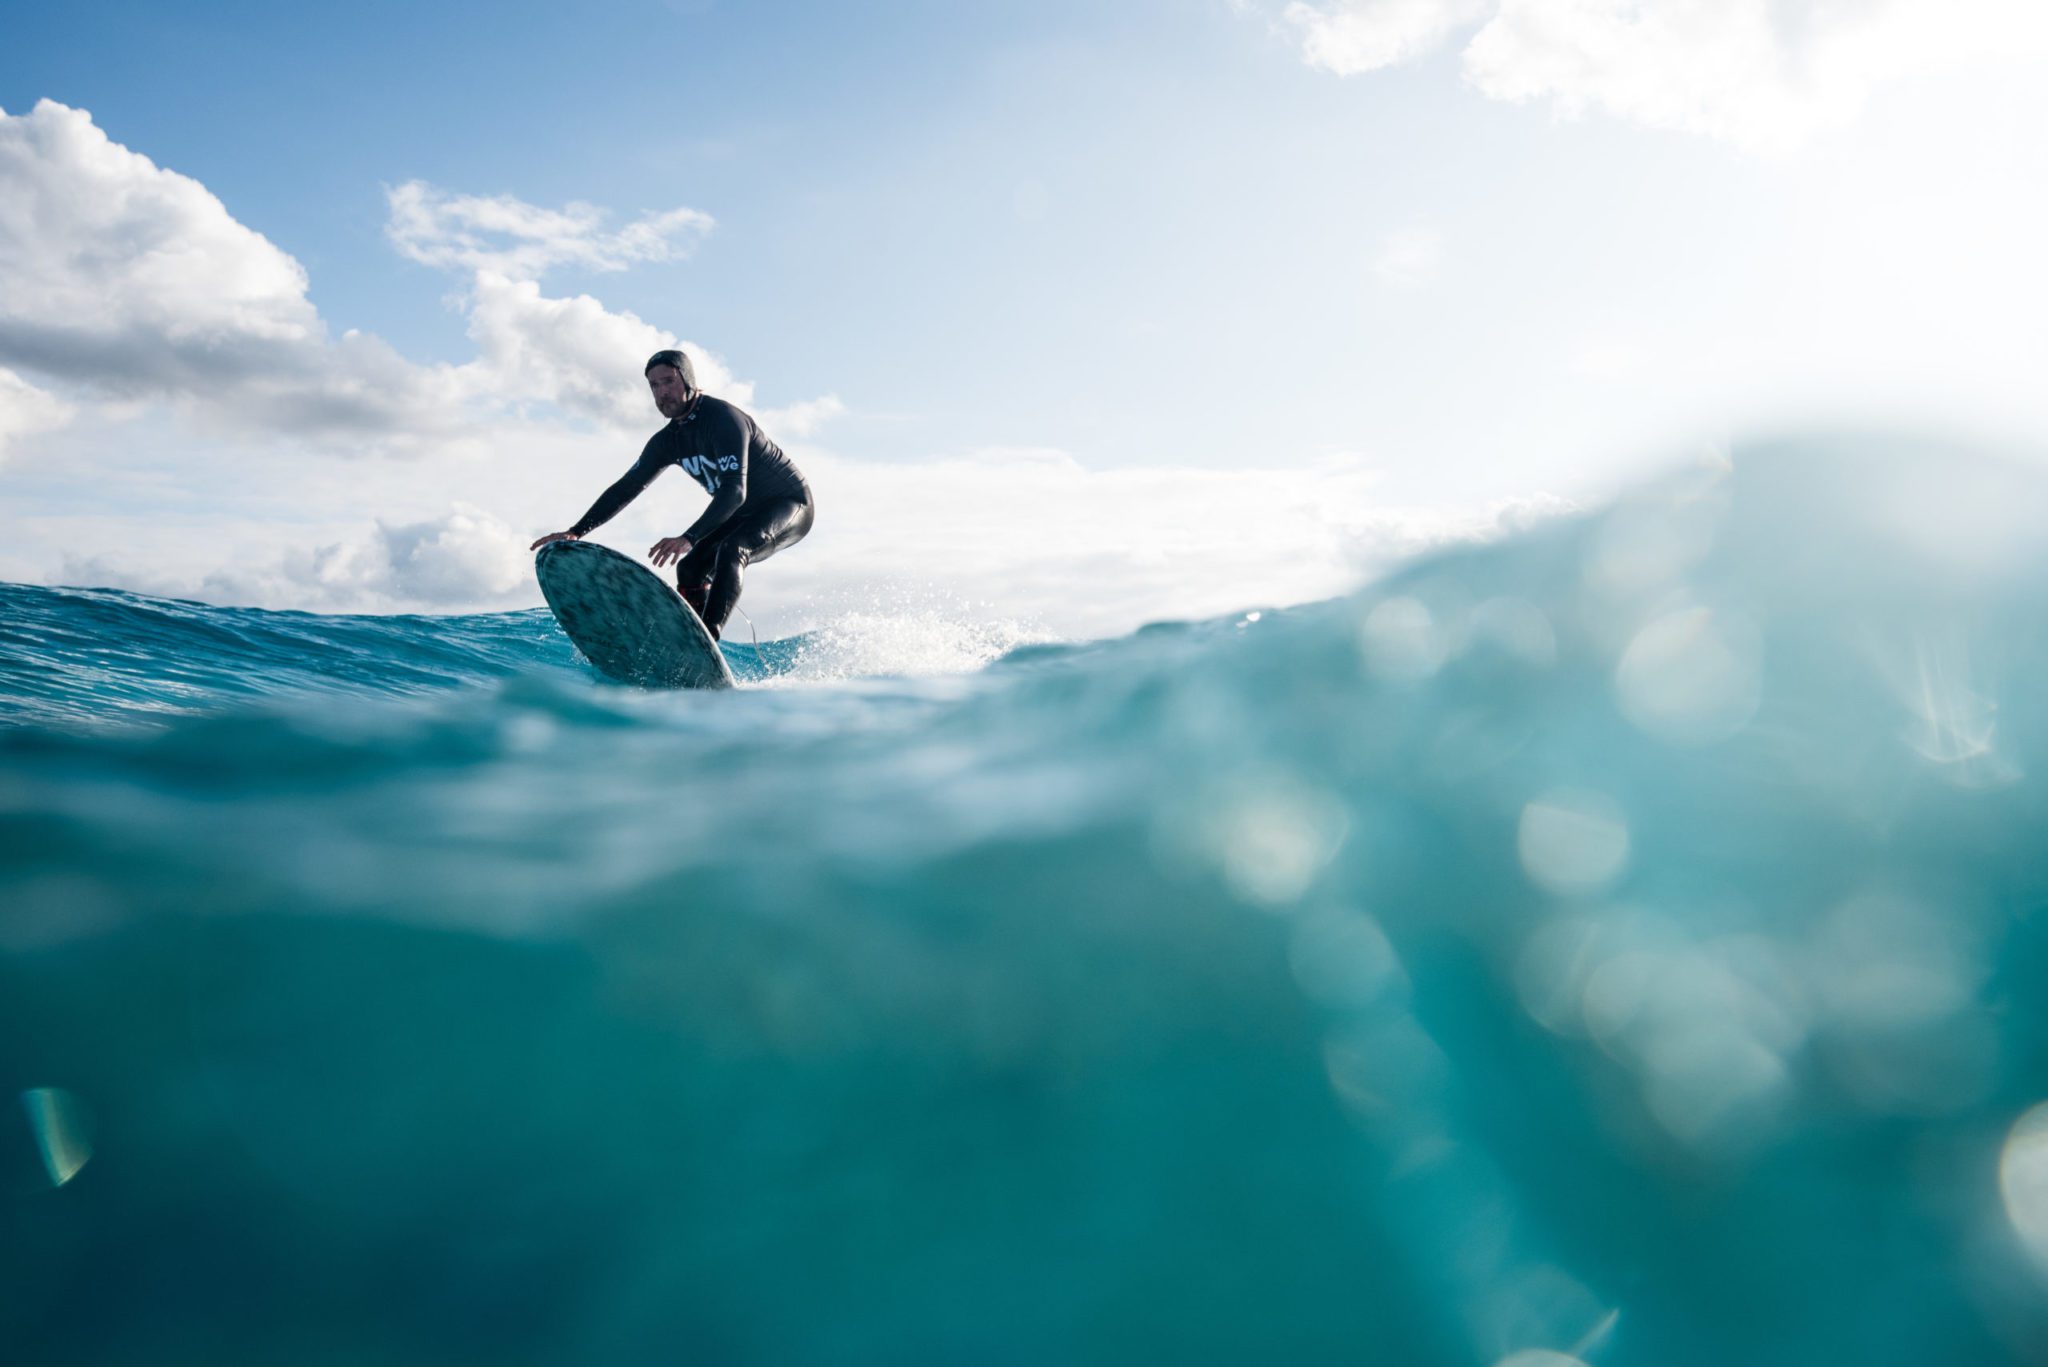 Surfer photograph from underwater at The Wave, surfing inland lake in Bristol